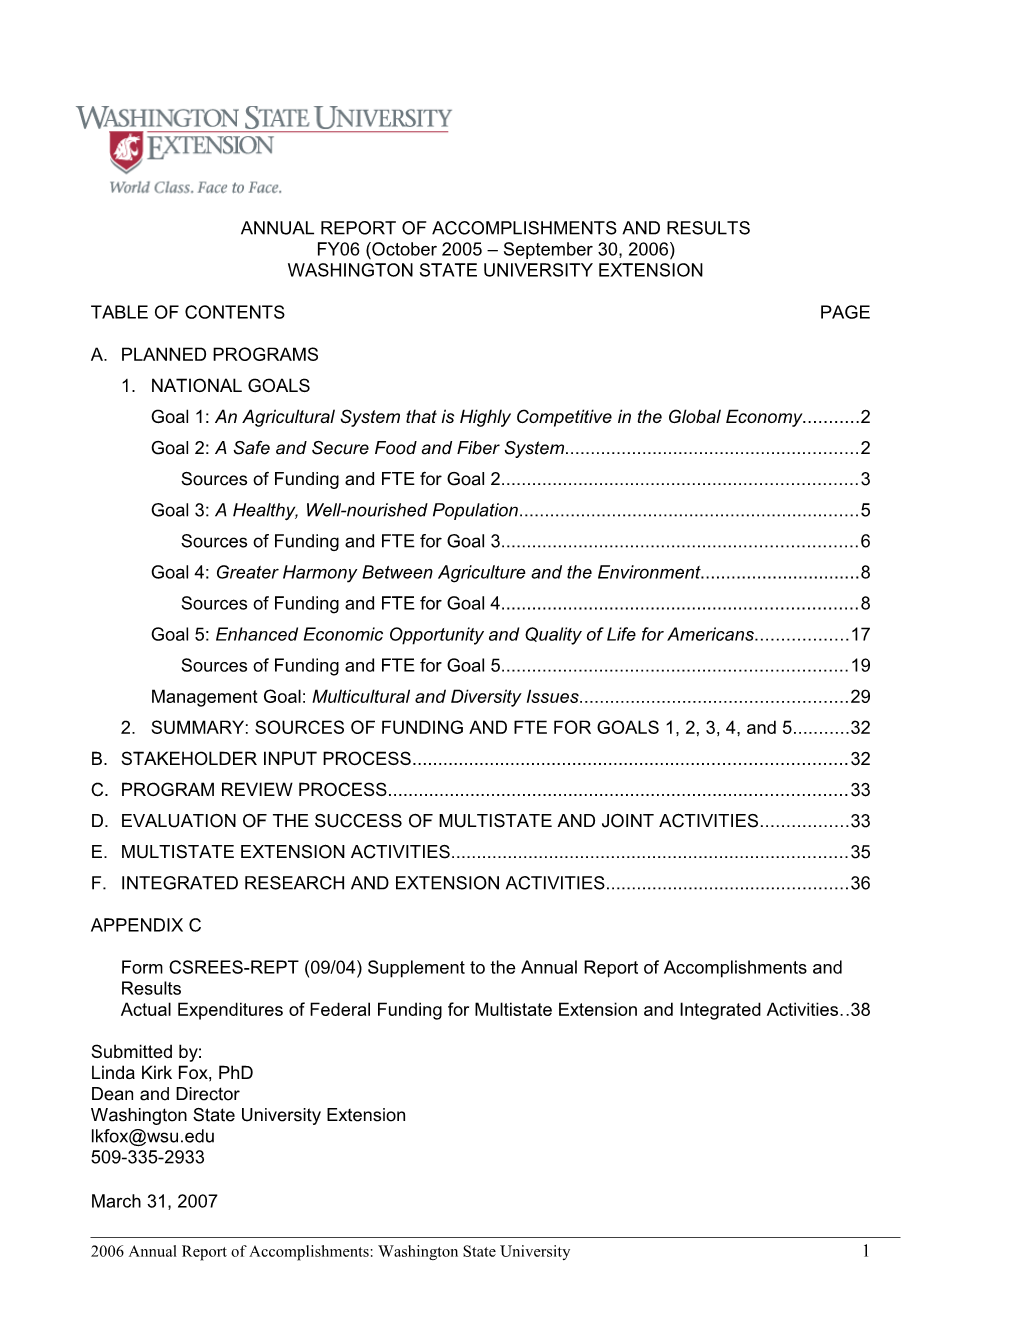 WSU Extension FY2004 Federal Report of Accomplishments